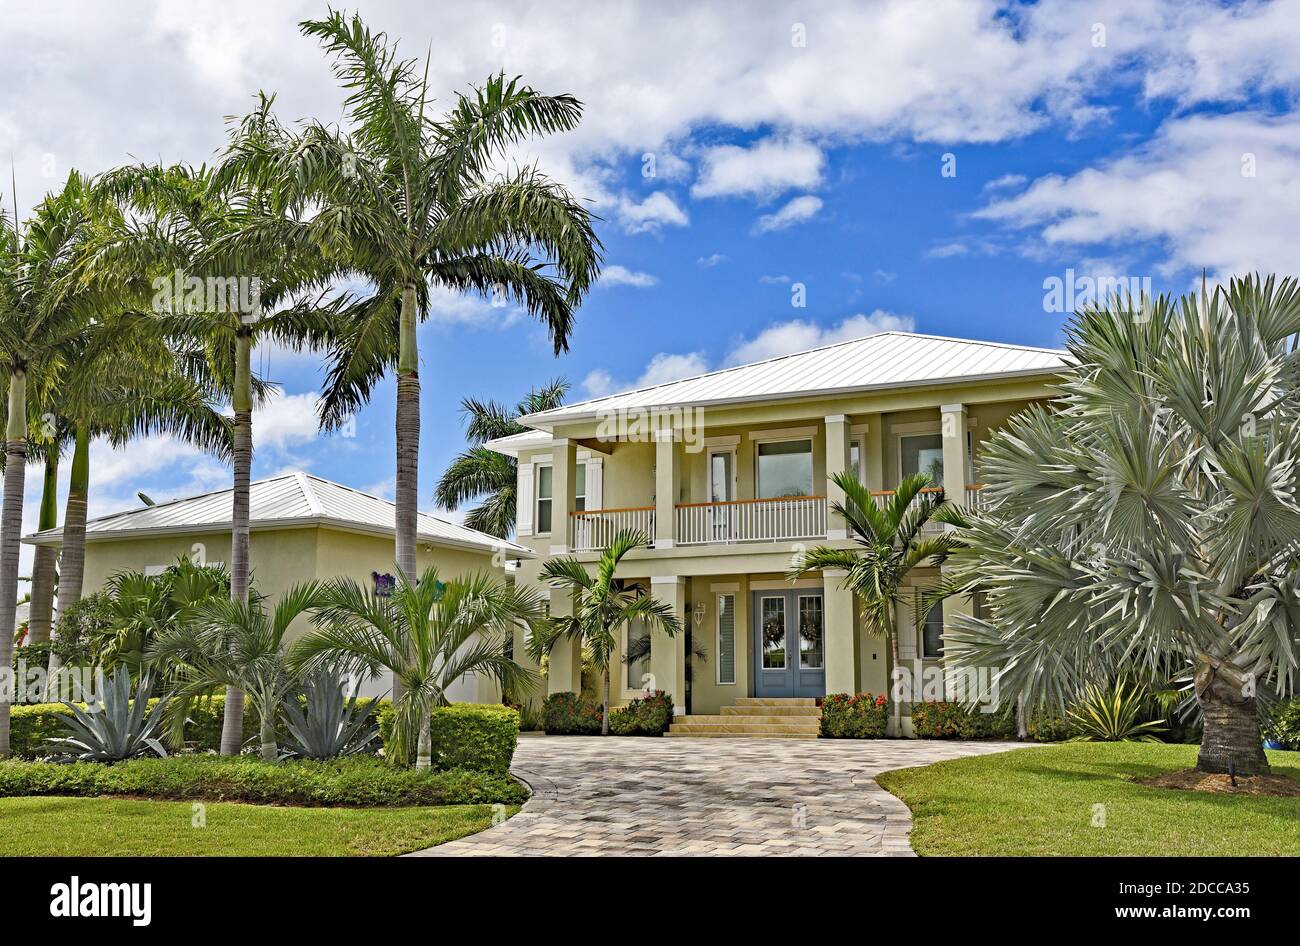 Large New Beach House in Florida with Palm Trees and Landscaping Stock Photo